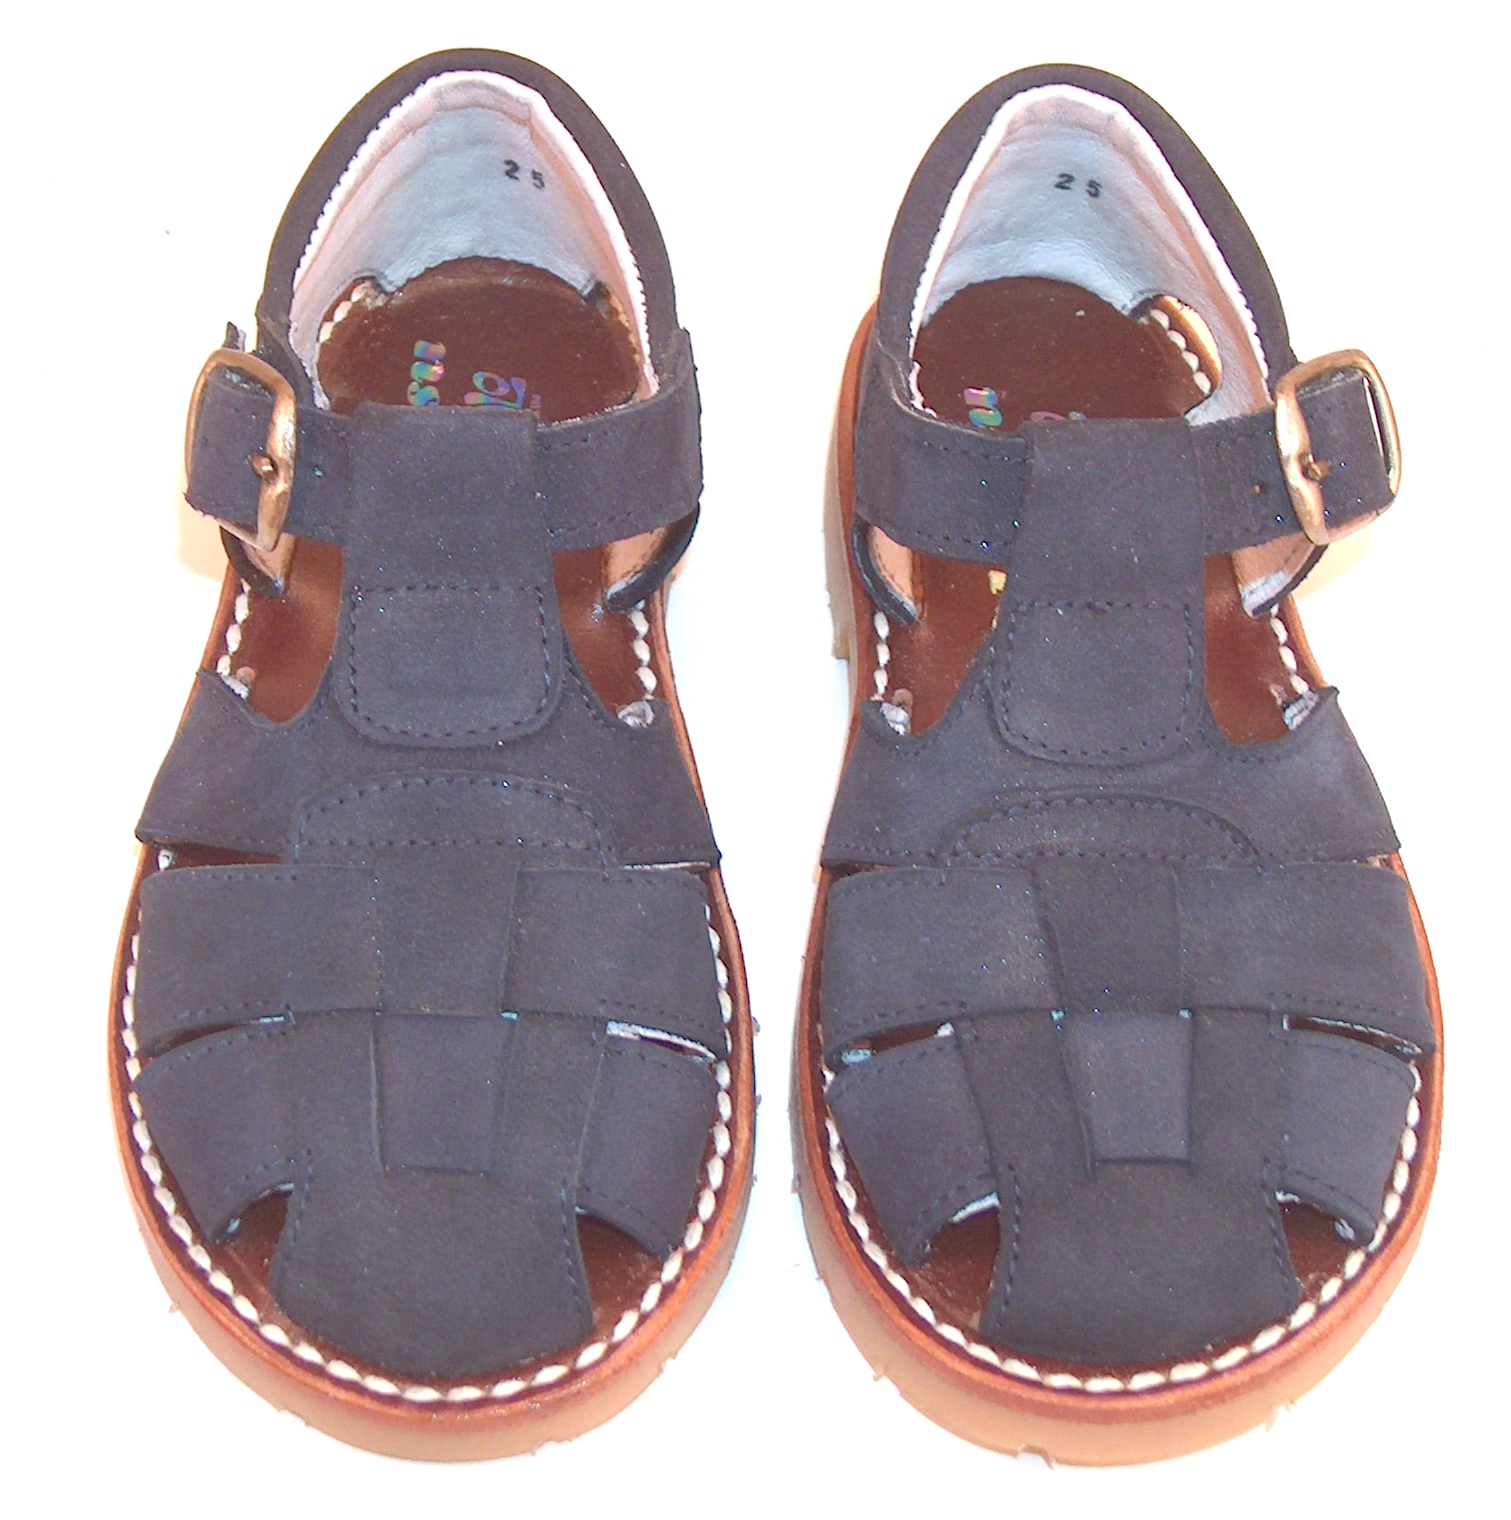 A-7119 - Navy Fisherman Sandals